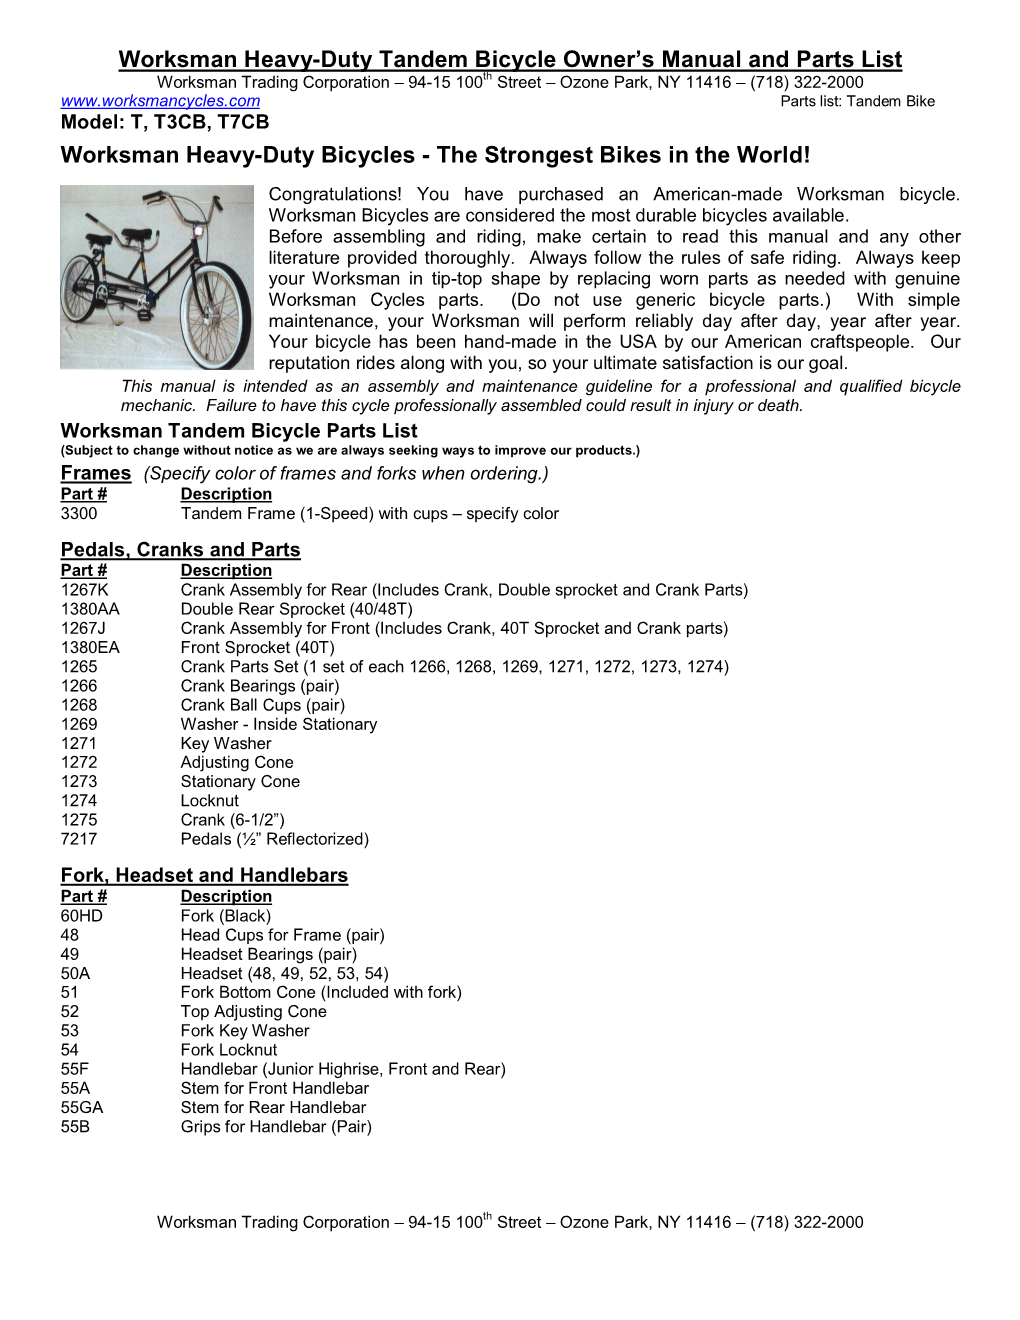 Worksman Heavy-Duty Tandem Bicycle Owner's Manual and Parts List